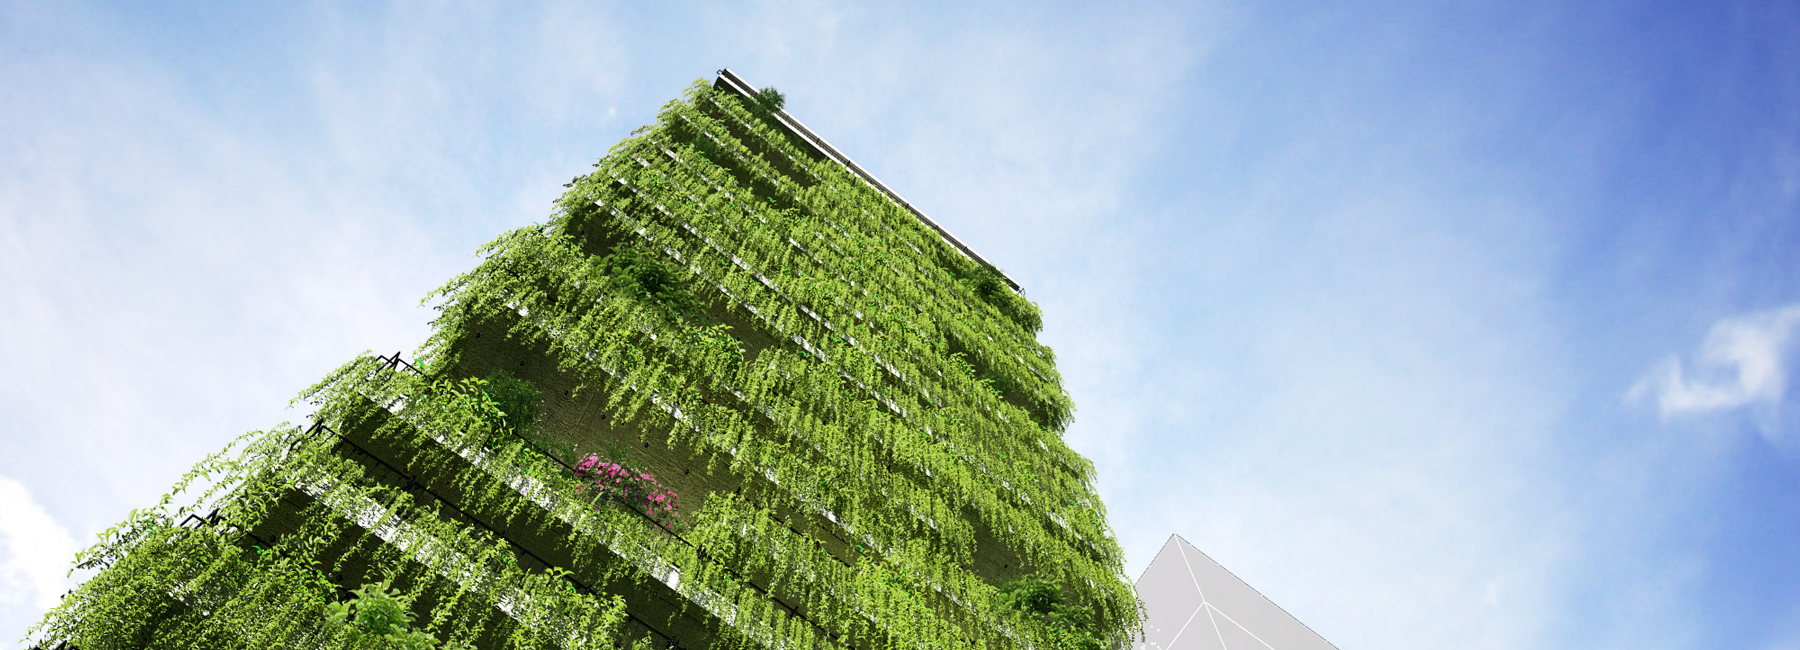 vo trong nghia plans tropical tower of hanging gardens for chicland hotel